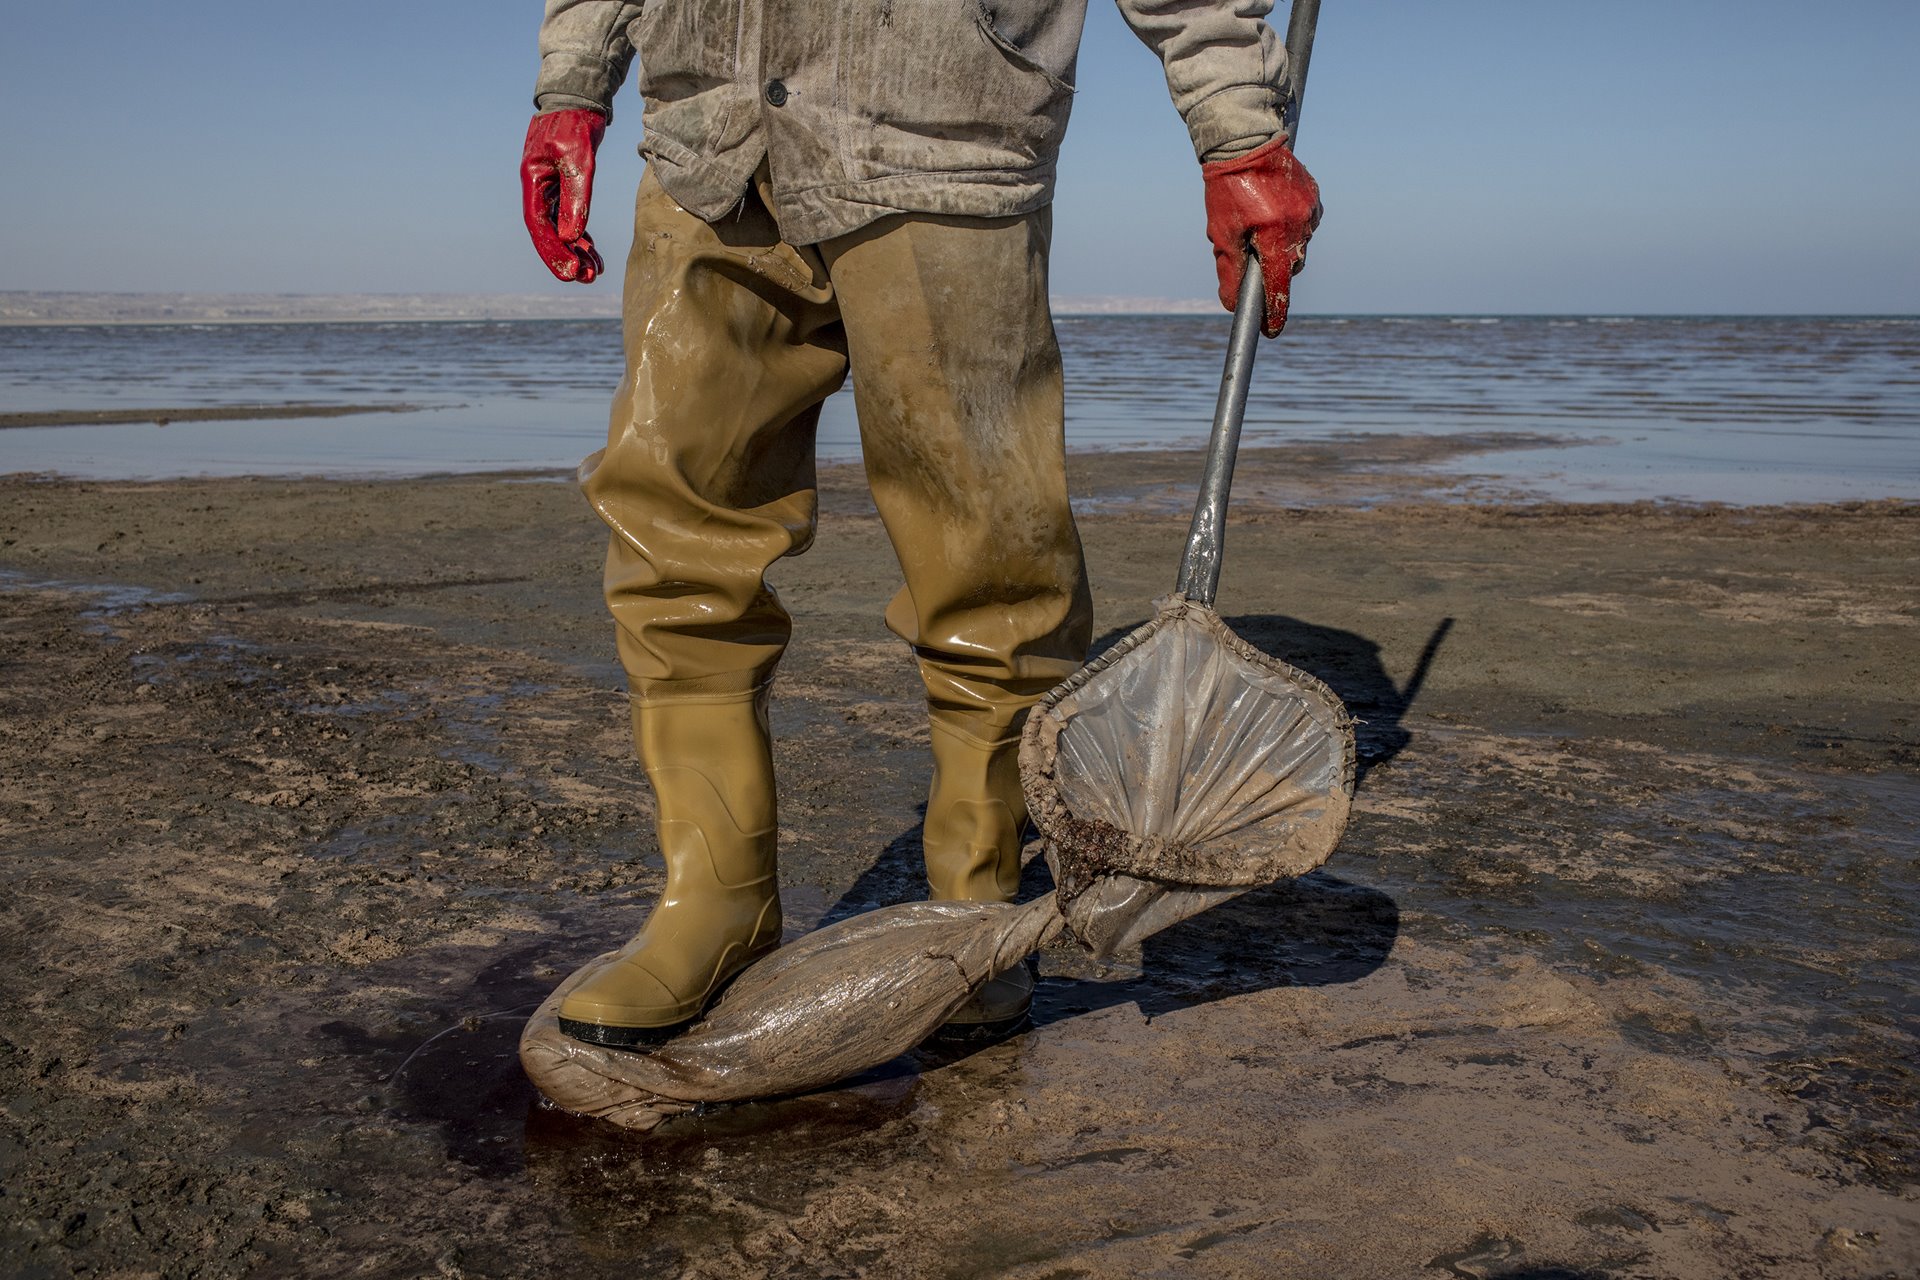 A shrimp farmer squeezes excess water out of a bag filled with minute <em>Artemia salina </em>brine shrimps, beside the Aral Sea, in Uzbekistan. Farming this ancient species of shrimp, which breed in highly saline water, is a growing industry along the shores of the Aral Sea. As its waters have receded, they have become increasingly saline.